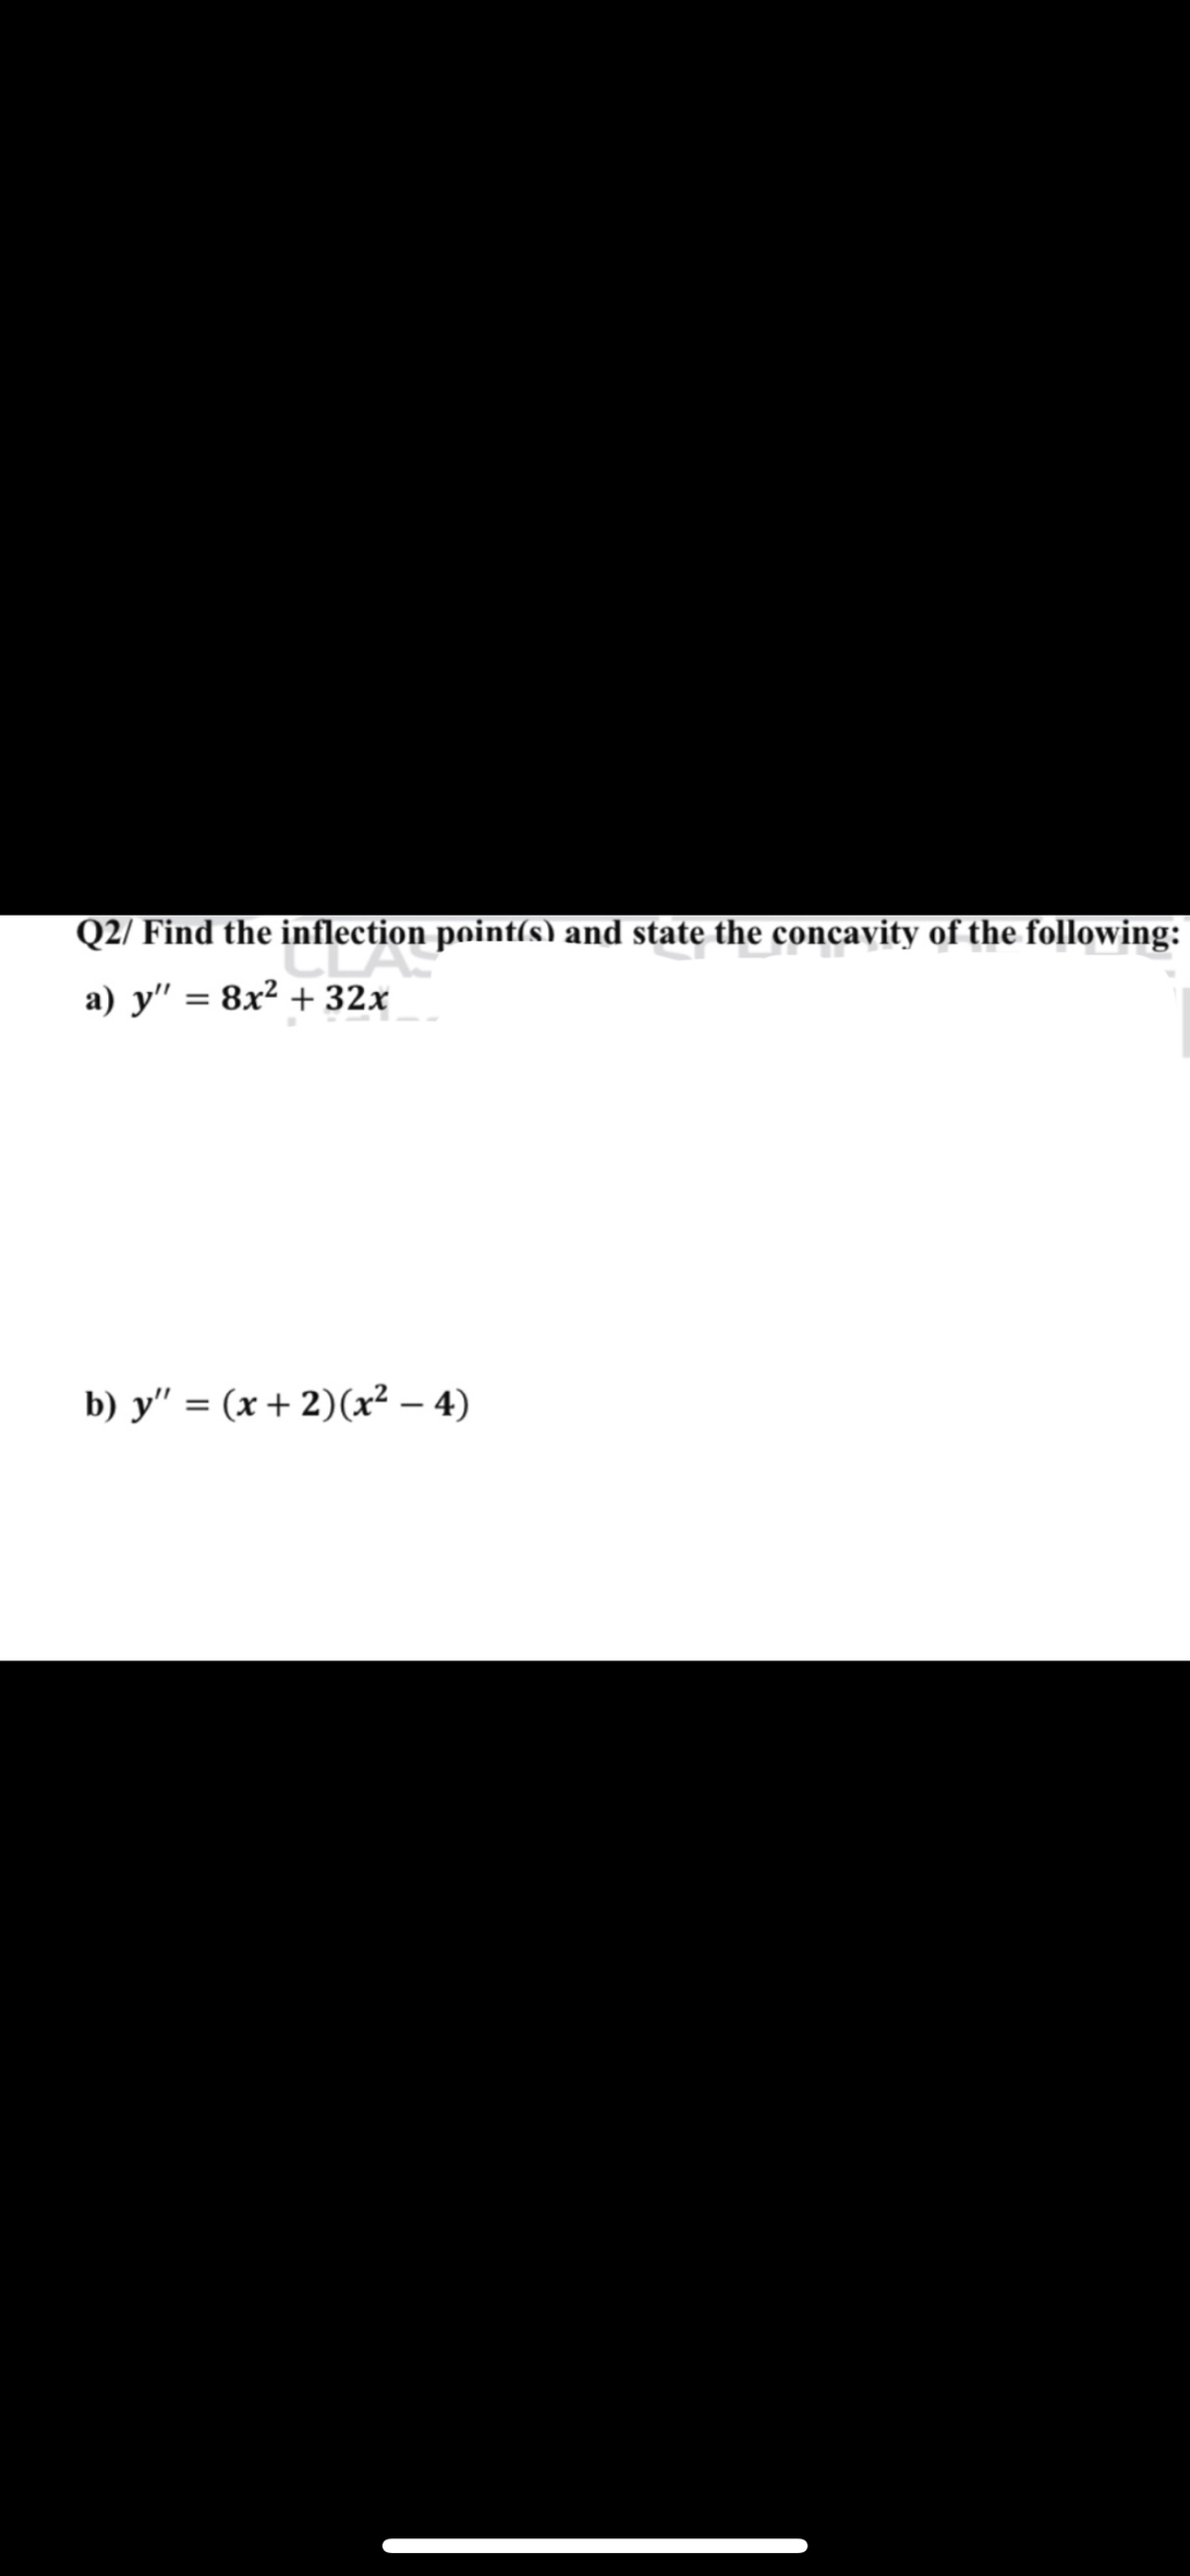 Q2/ Find the inflection point(s) and state the concavity of the following:
a) y" = 8x² + 32x
b) y" = (x + 2)(x² – 4)
